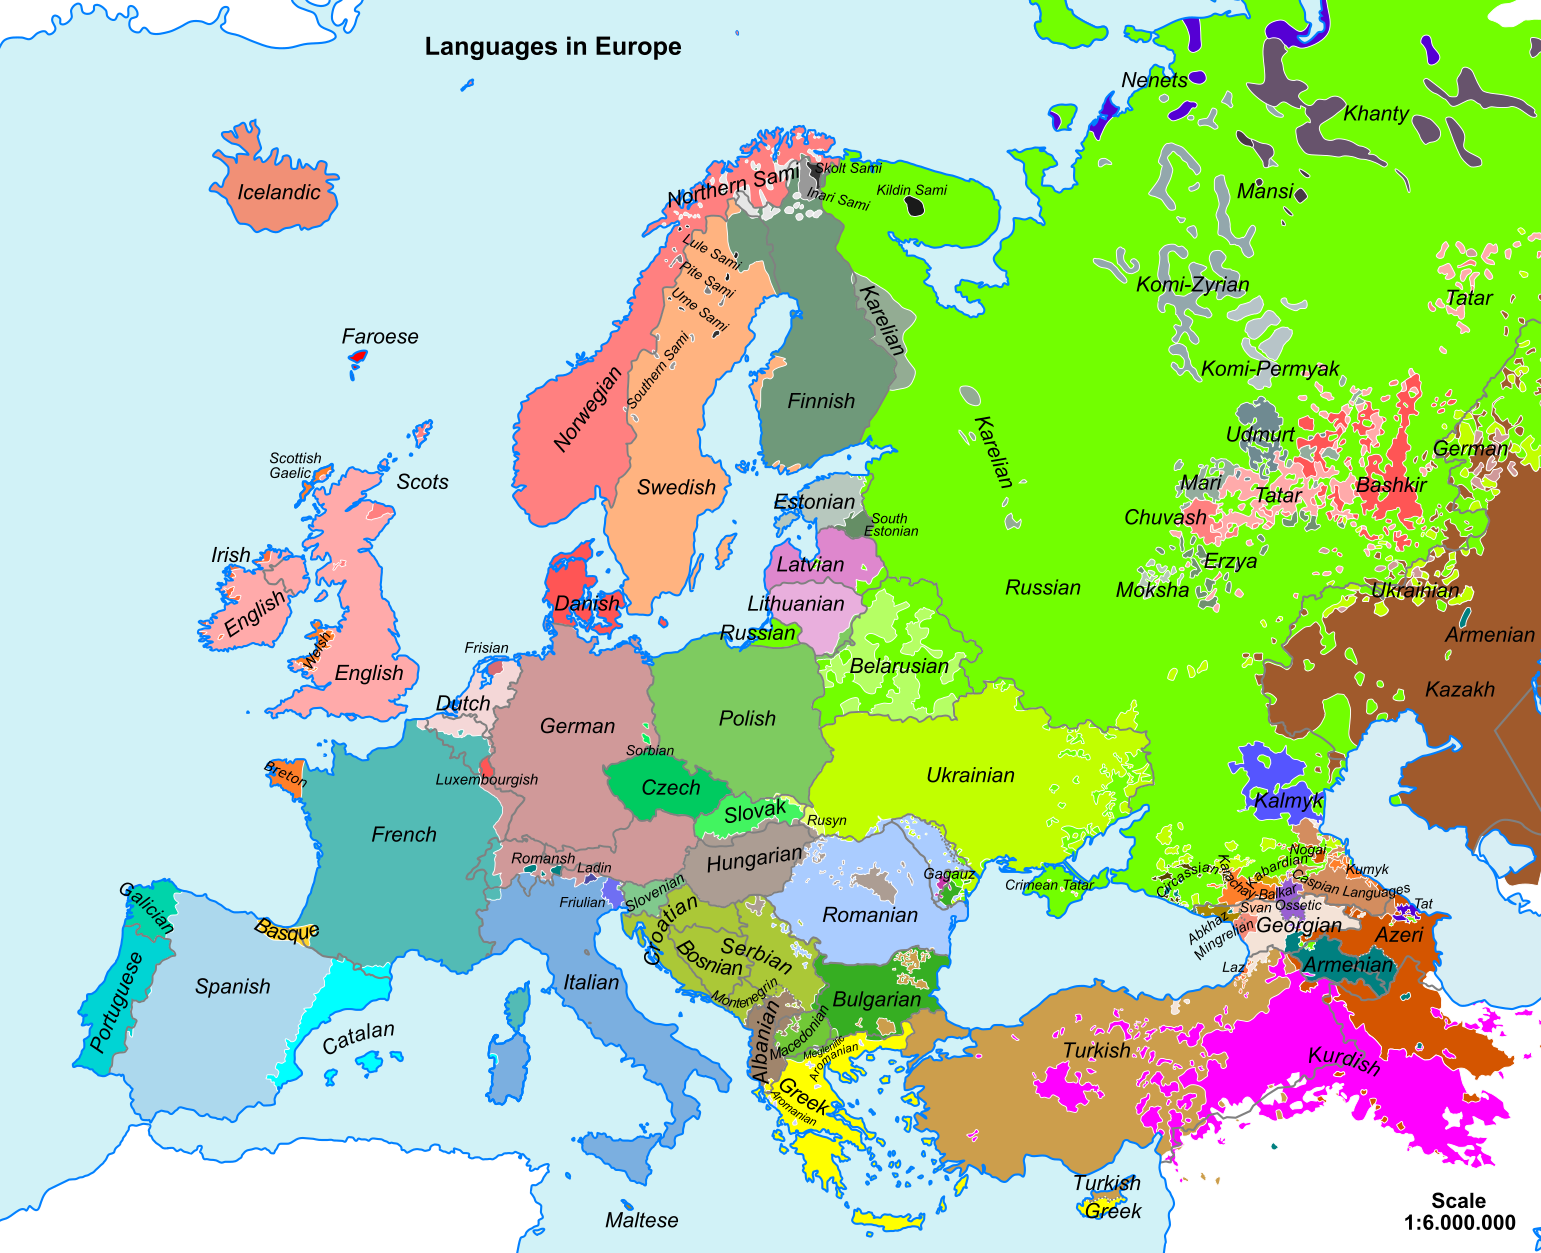 1541px-Simplified_Languages_of_Europe_map.svg.png